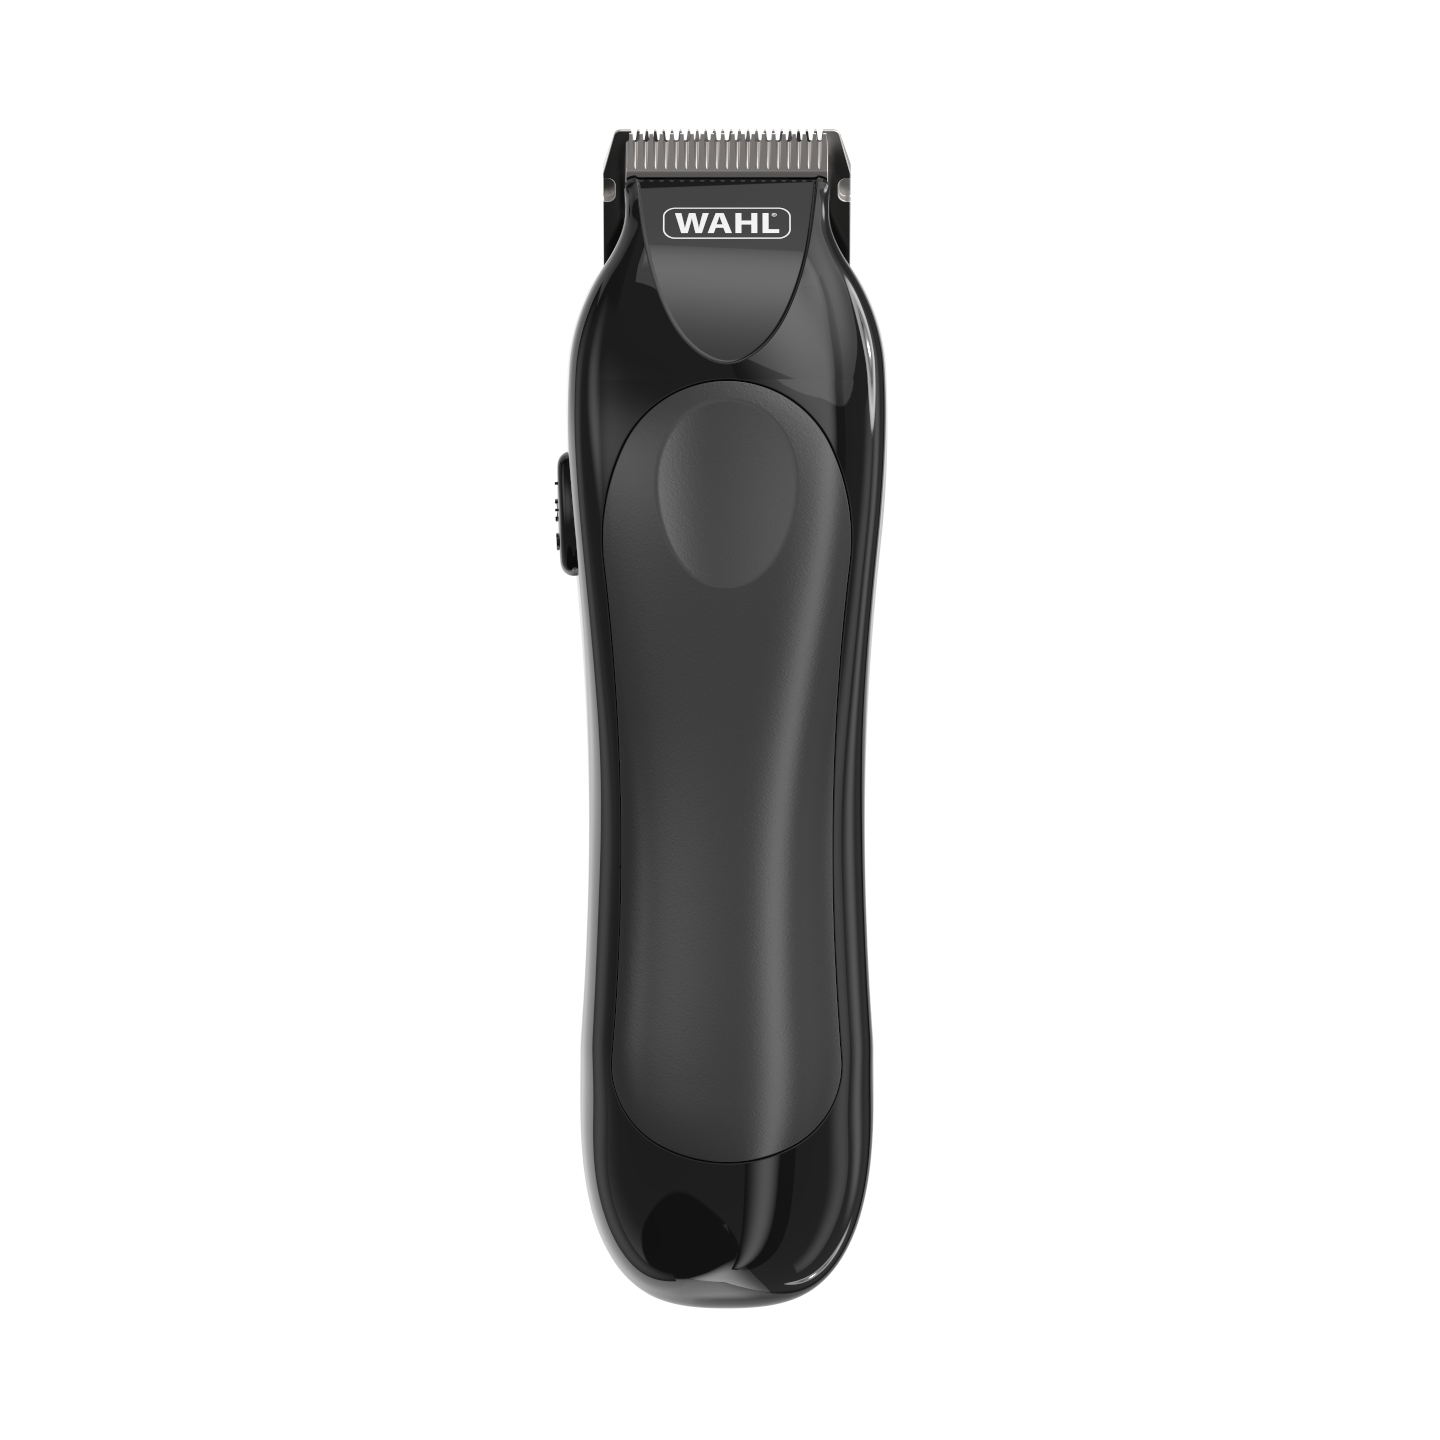 small electric hair clippers